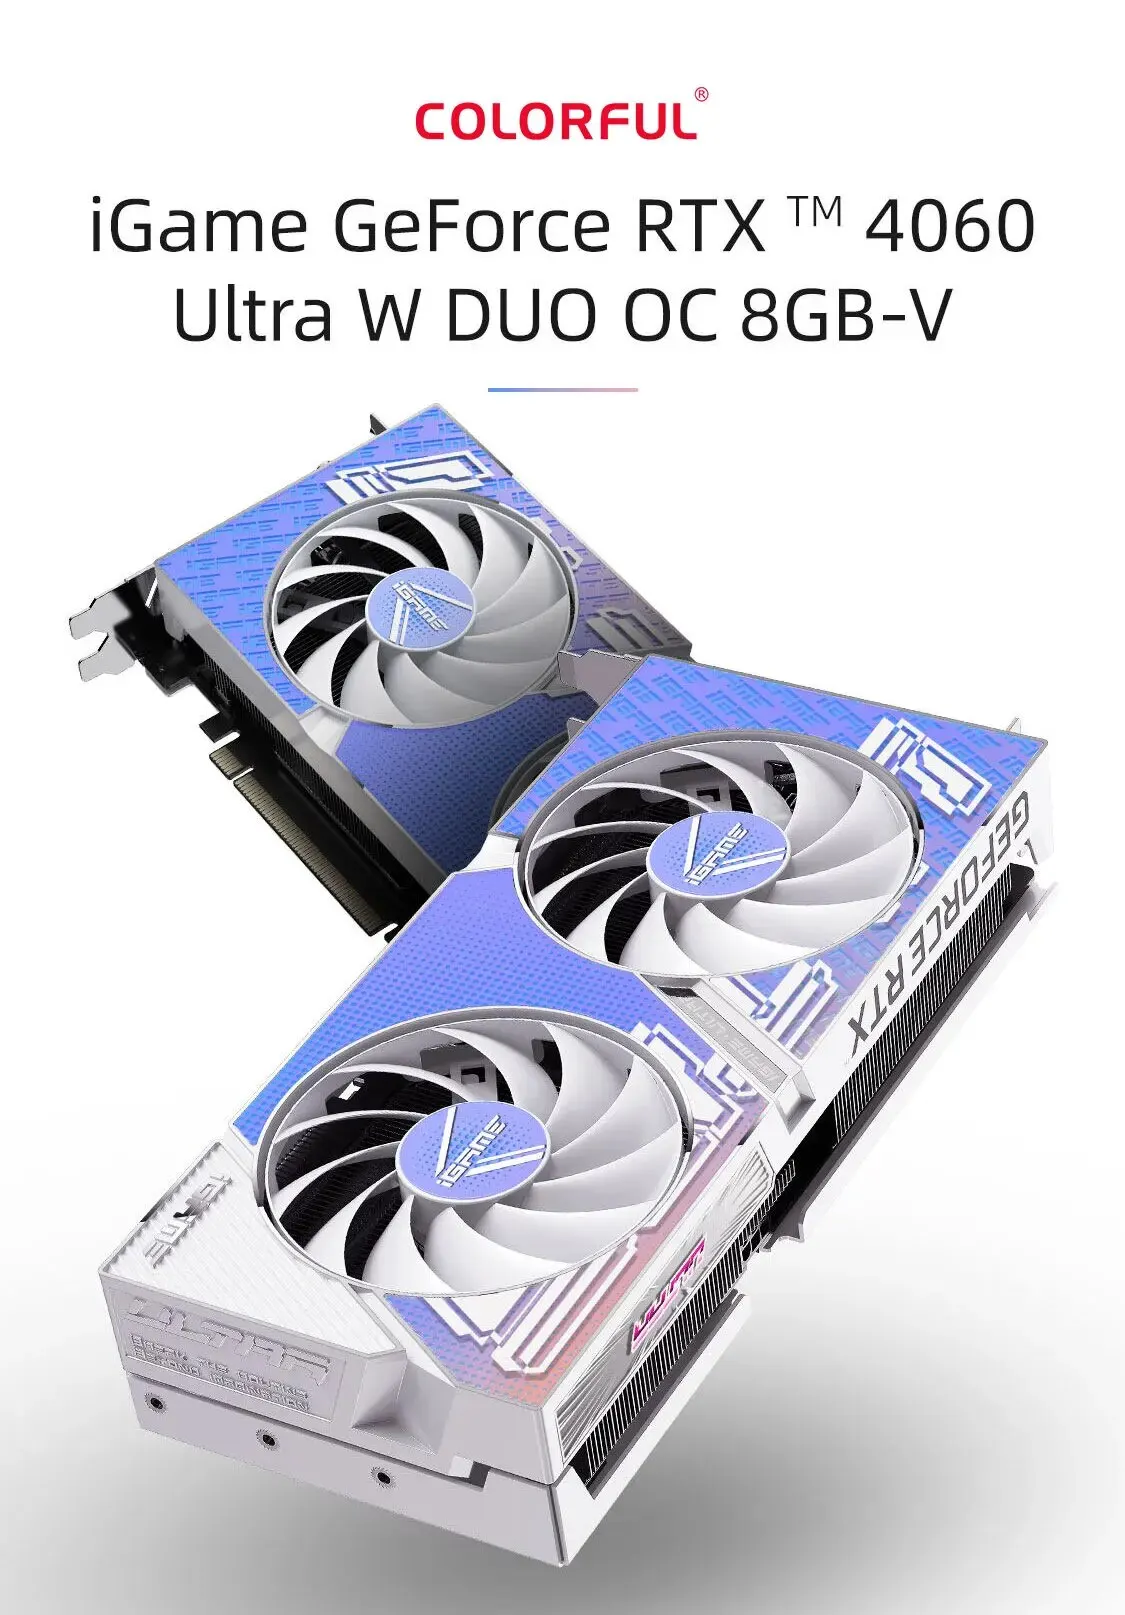 4060 Colorful. Colorful rtx 4060 ultra w duo oc